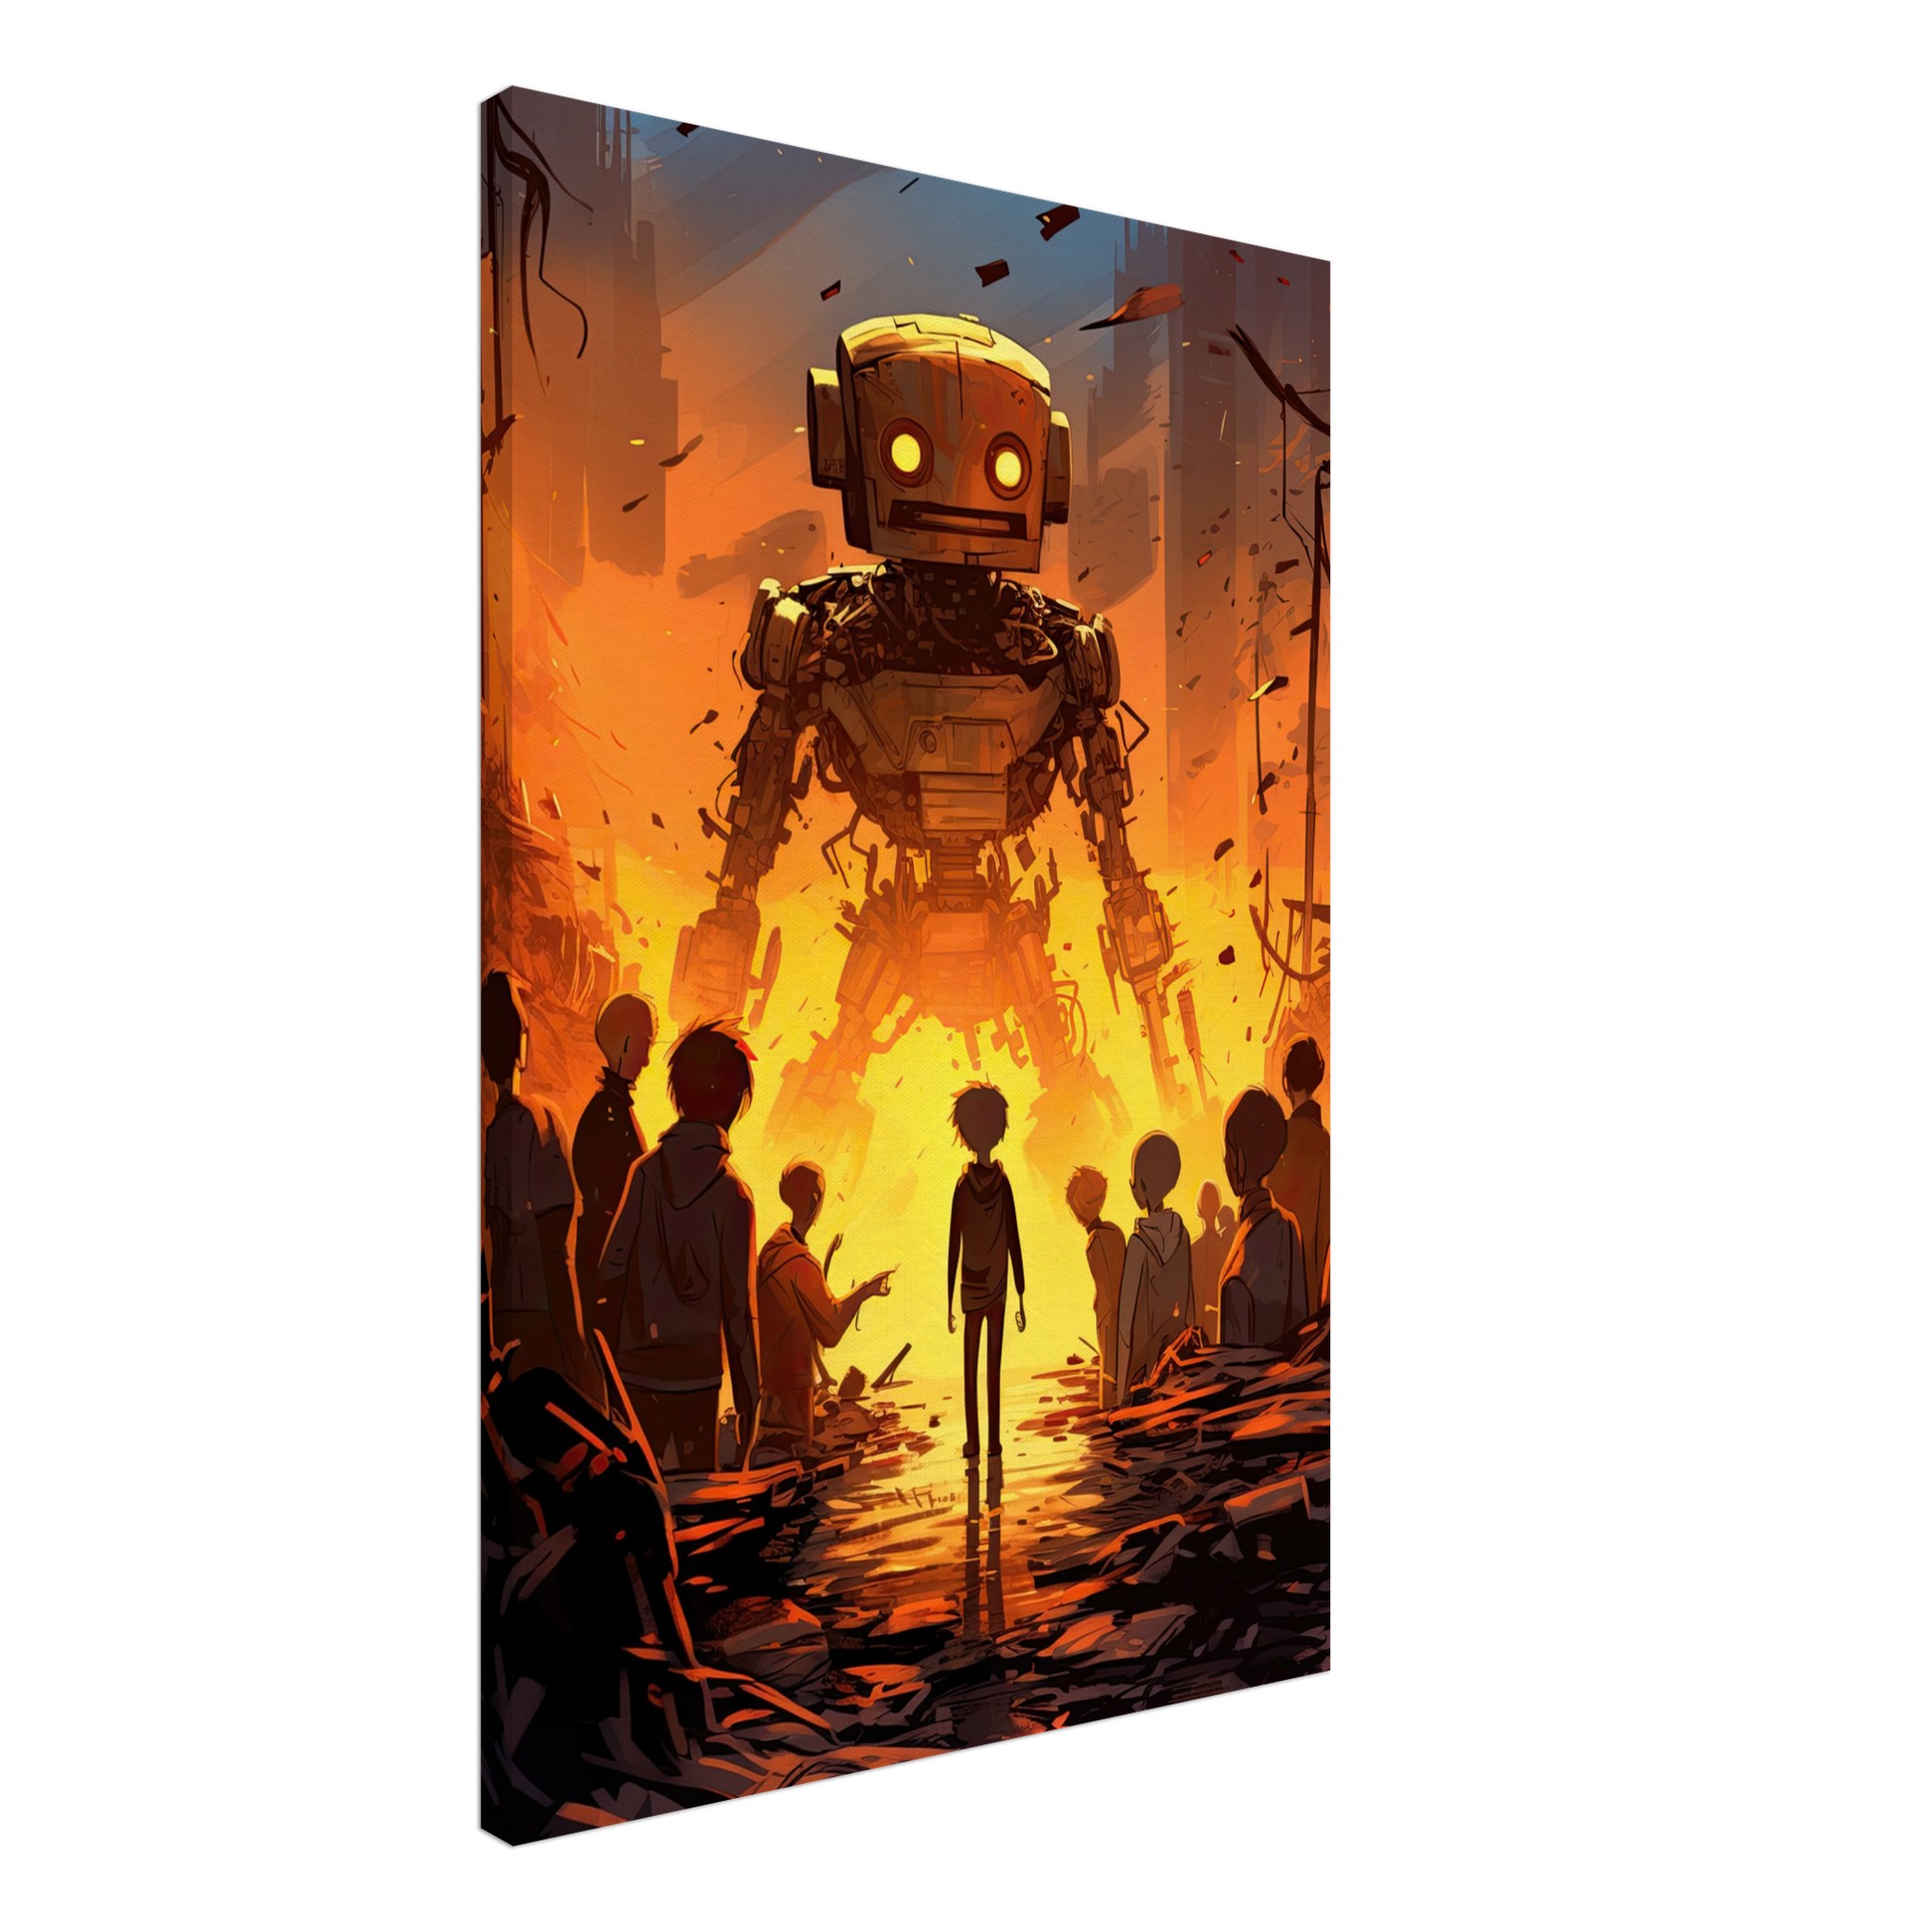 Robot Overlord – Anime Canvas Print – 60×90 cm / 24×36″, Thick